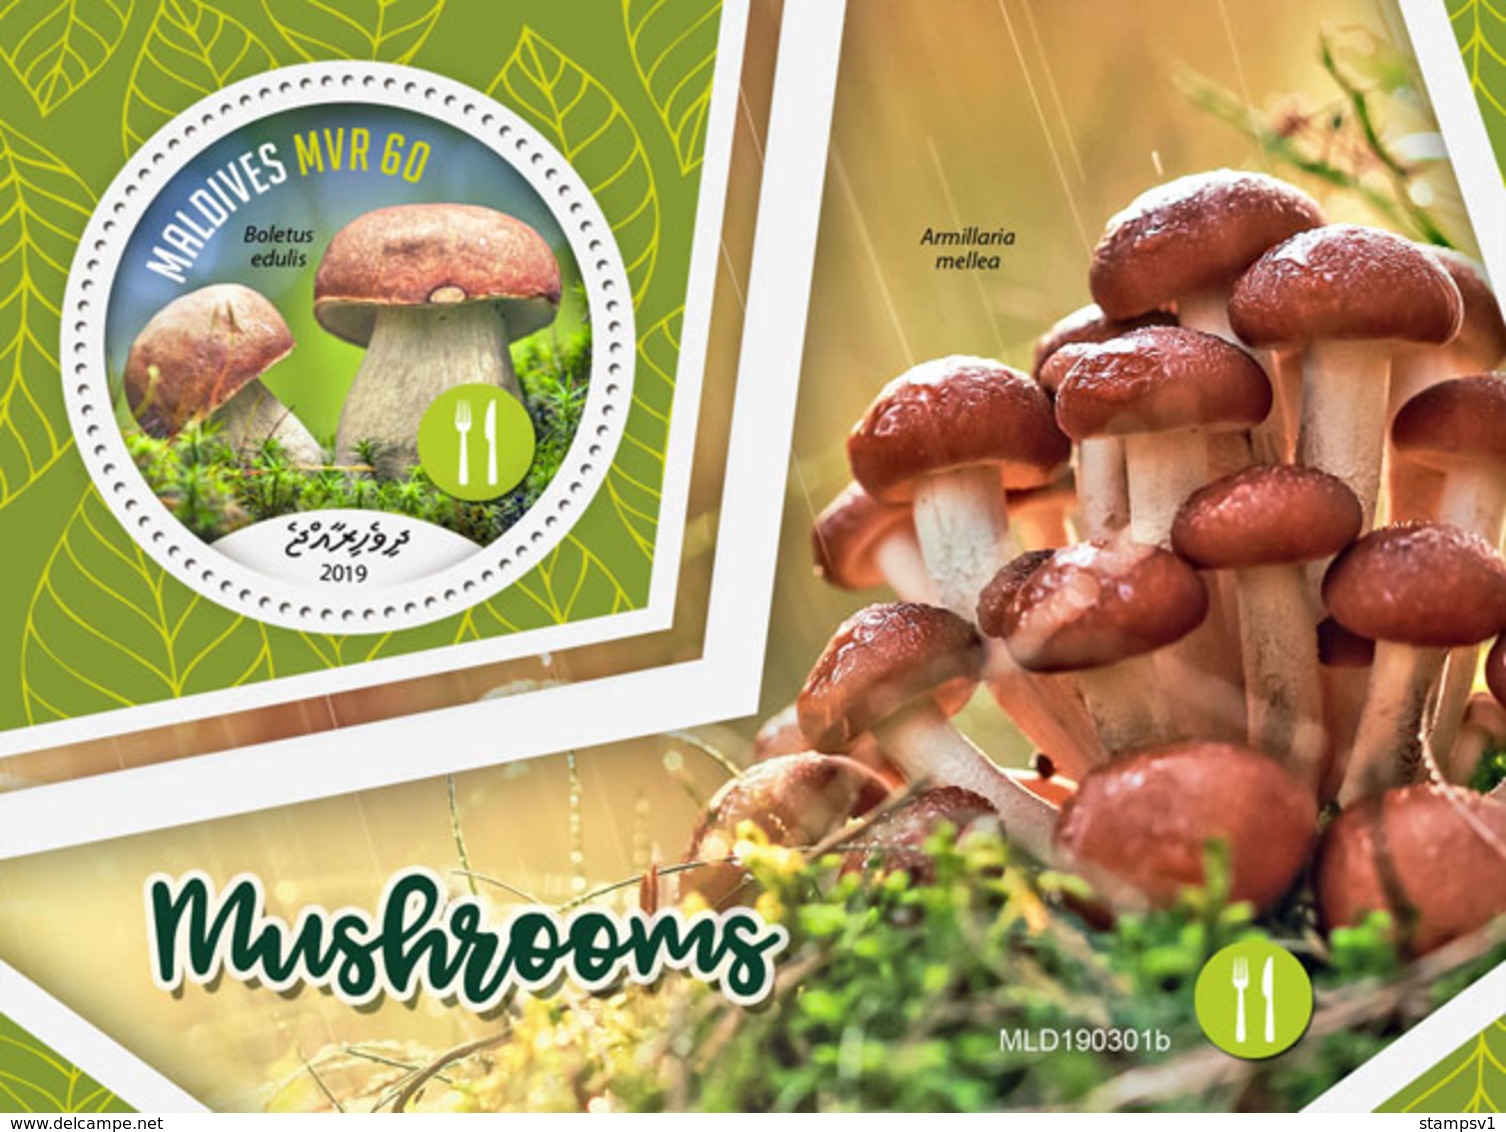 Maldives. 2019 Mushrooms. (0301b)  OFFICIAL ISSUE - Funghi